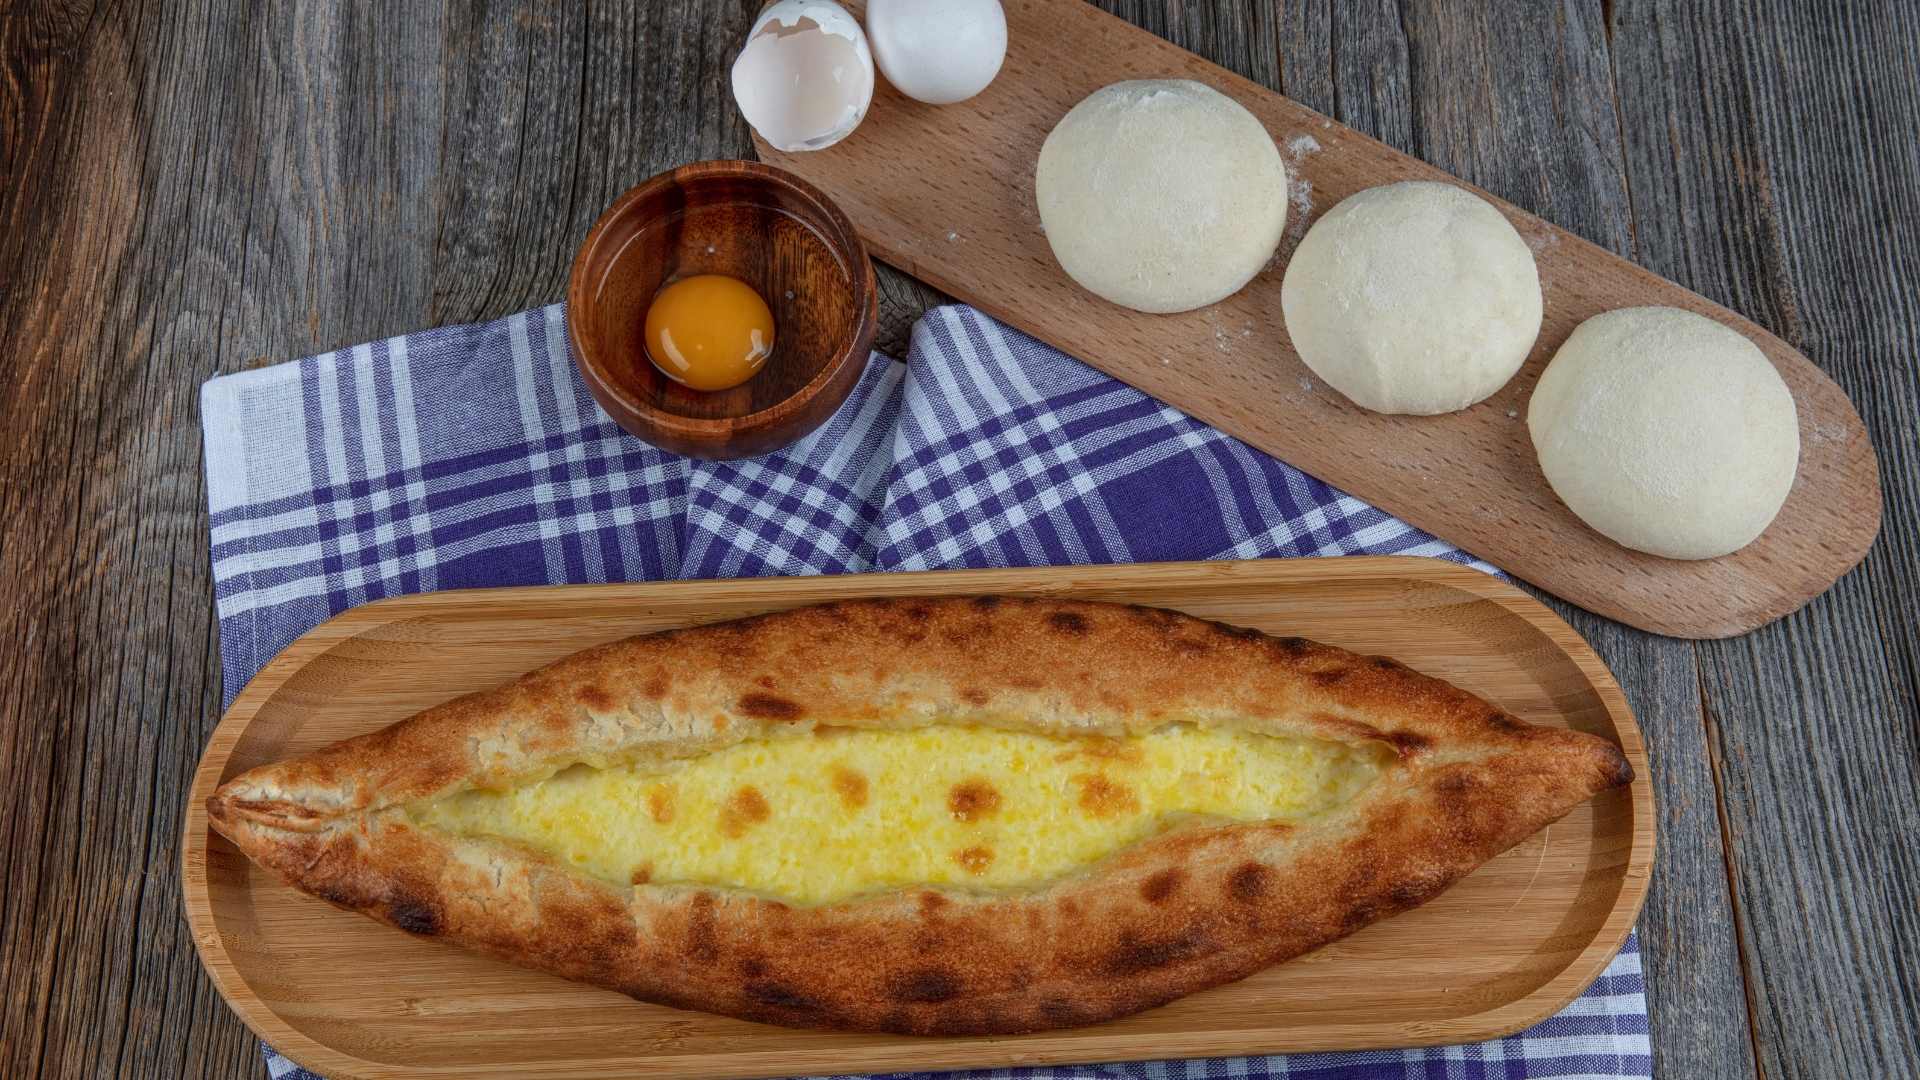 Cheese Lovers Rejoice This Mouth-Watering Cheese Pide Recipe Will Leave You Craving More 3